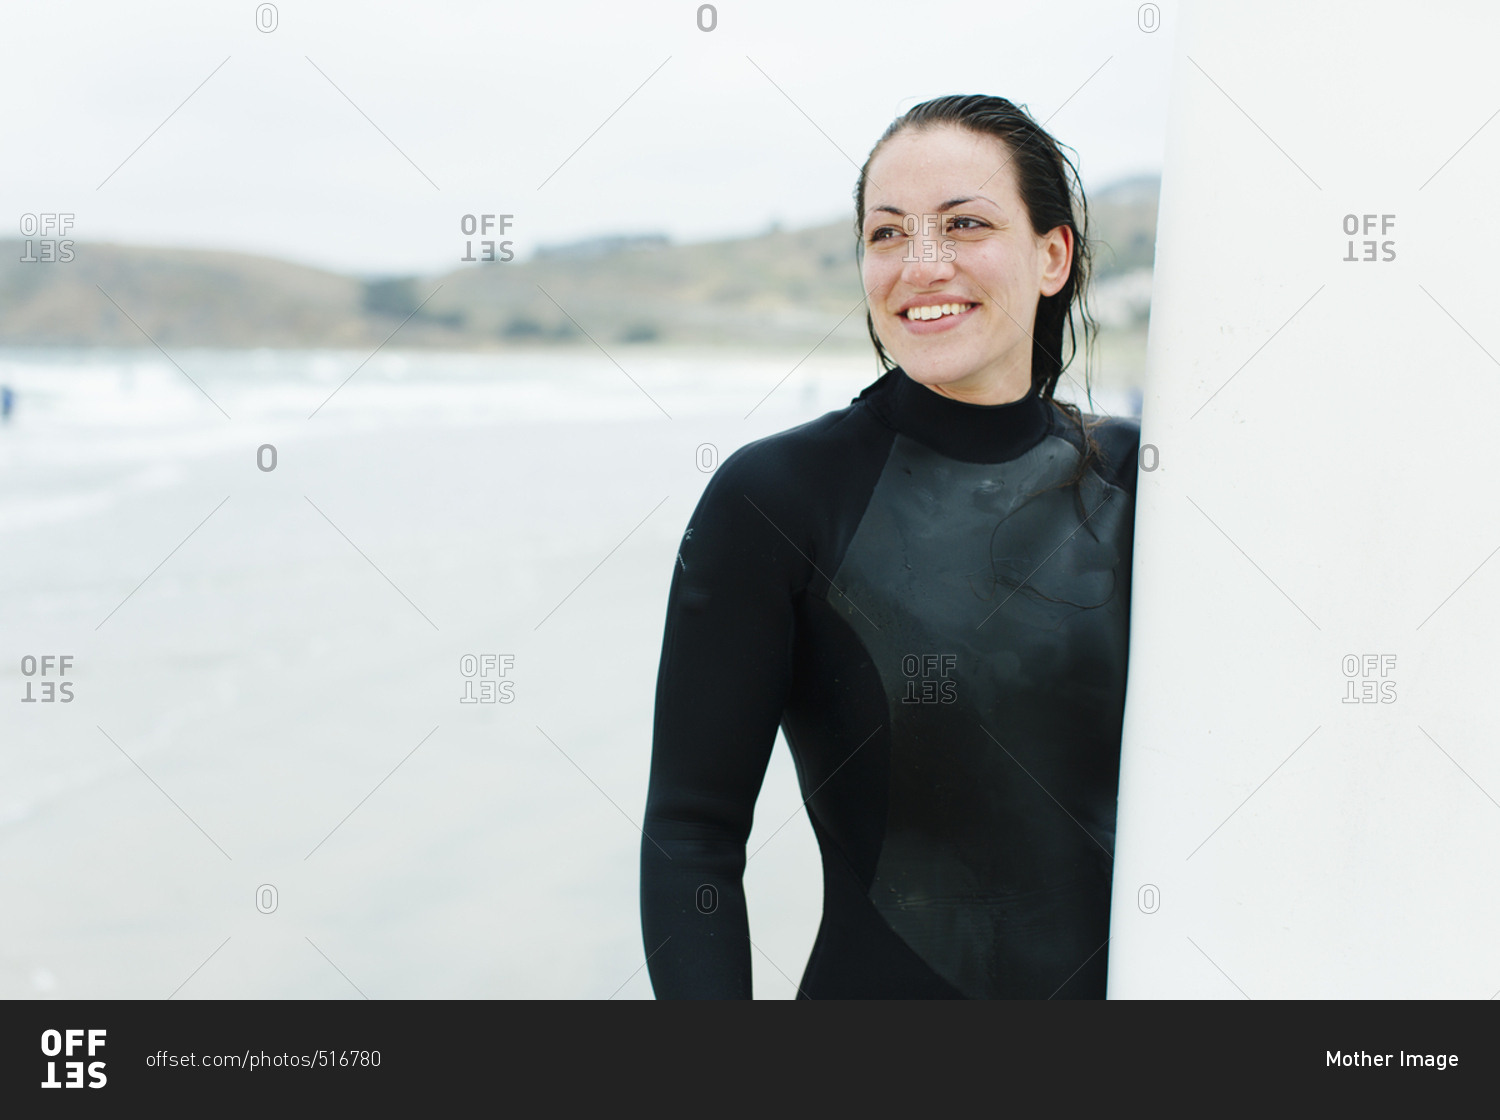 Female laughs at surf lesson in San Francisco, California